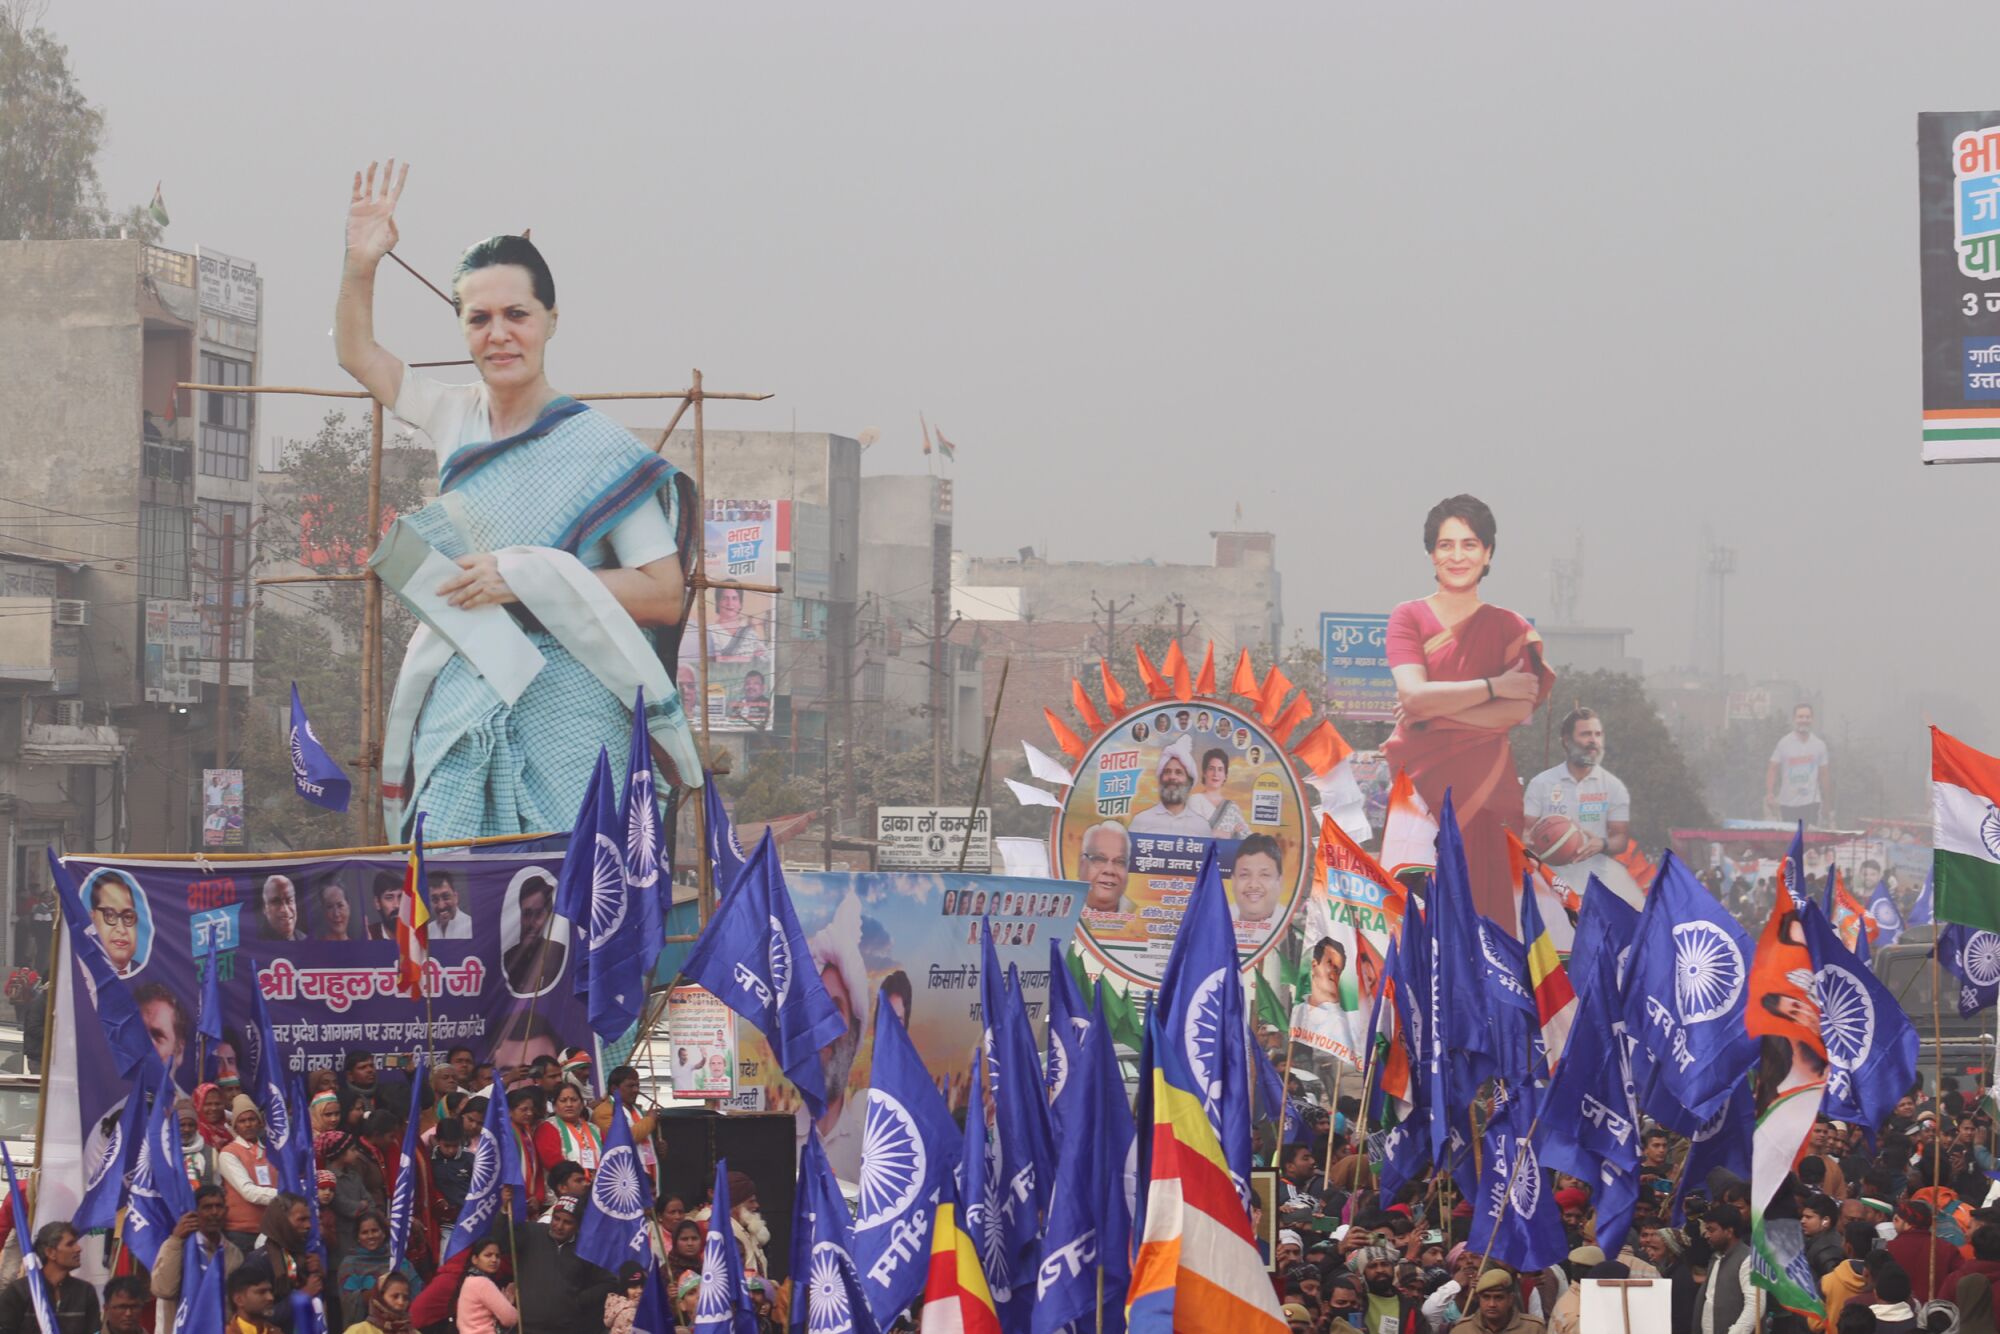 A likeness of Sonia Gandhi appears at a demonstration.